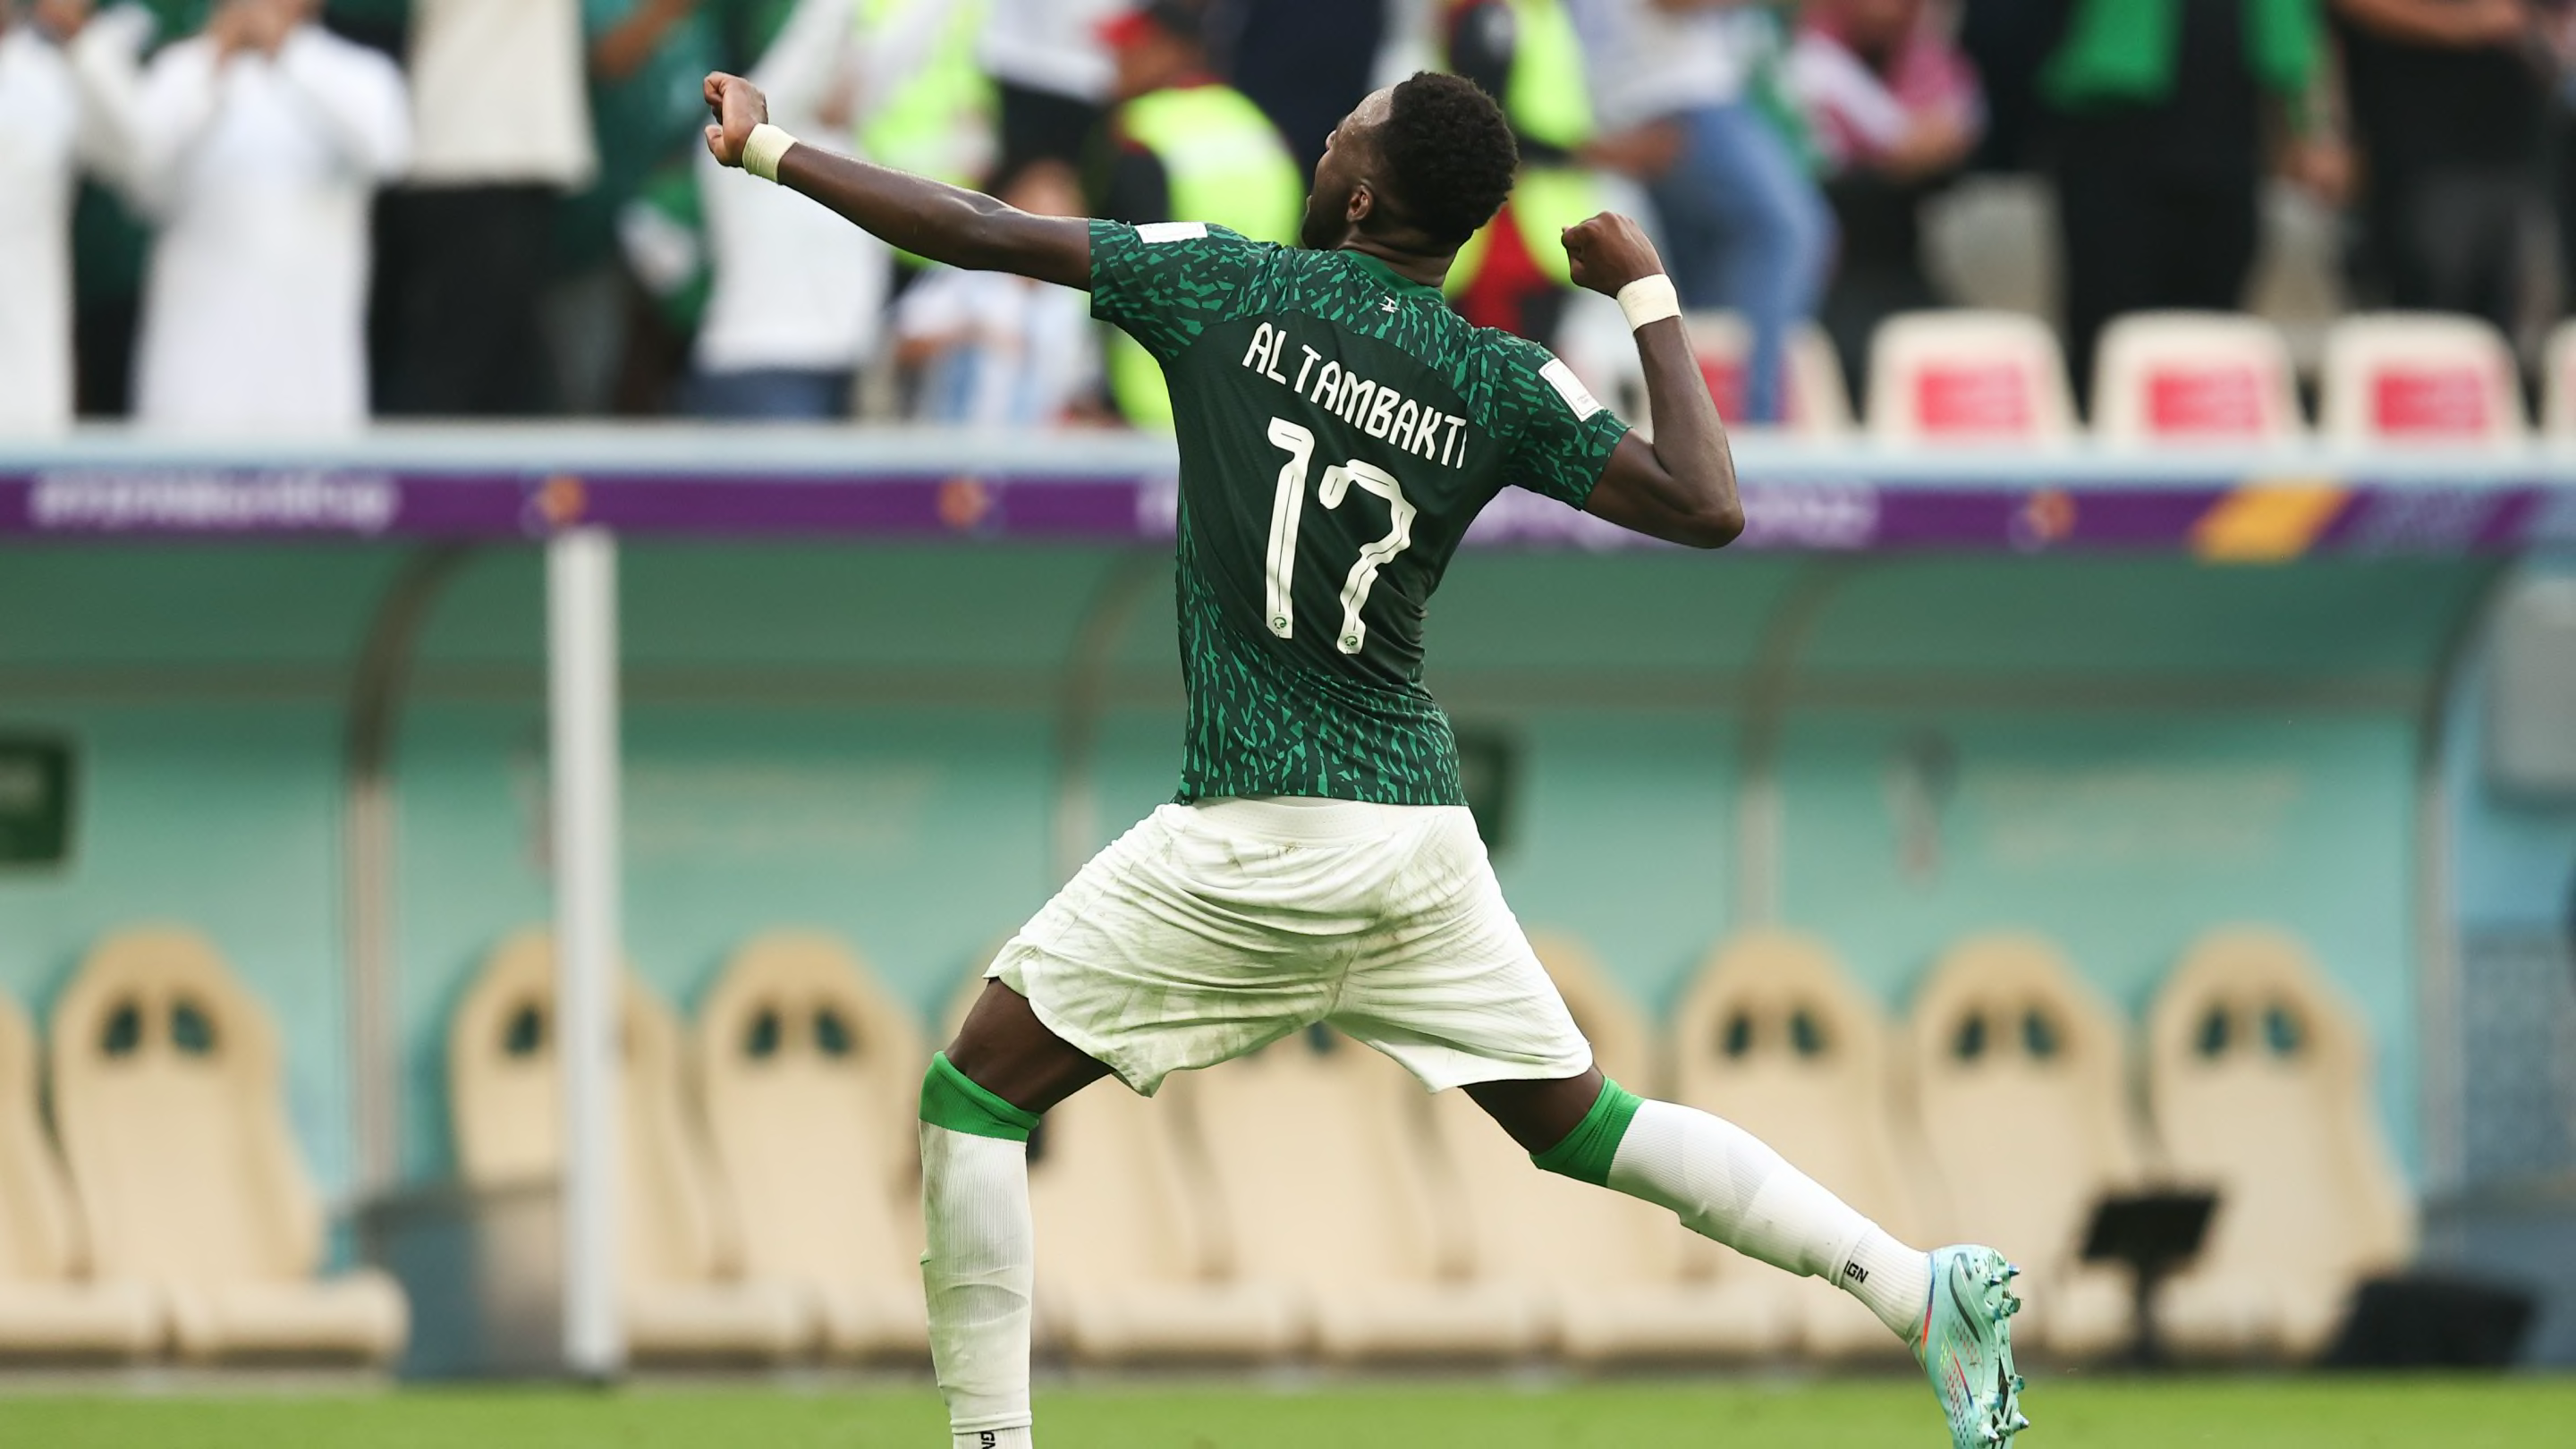 2022 World Cup defender power rankings: Matchday 1